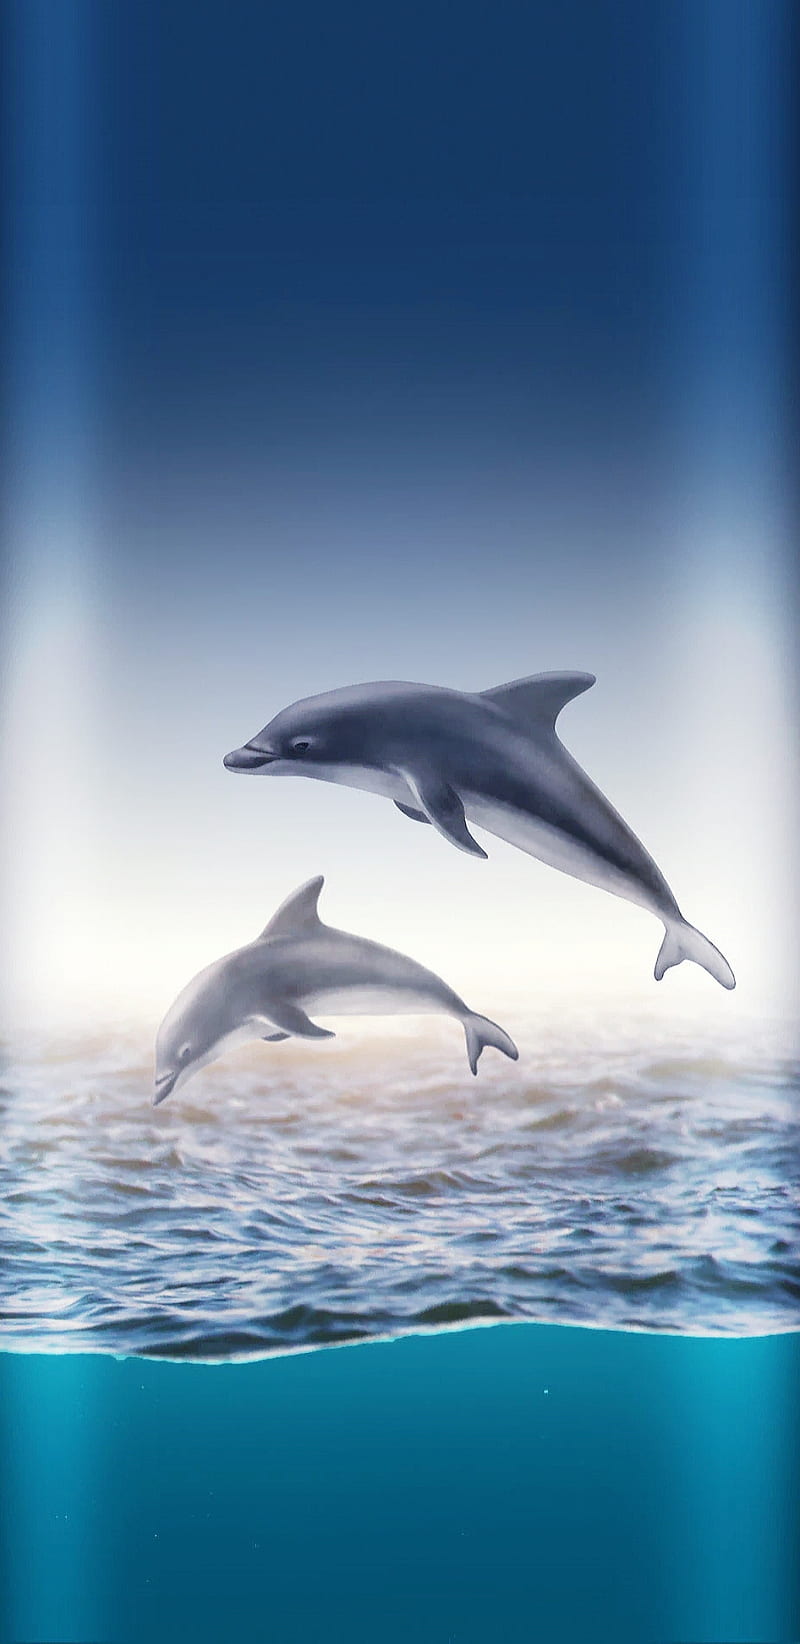 DolphiniPhoneWallpaper  iPhone Wallpapers  iPhone Wallpapers